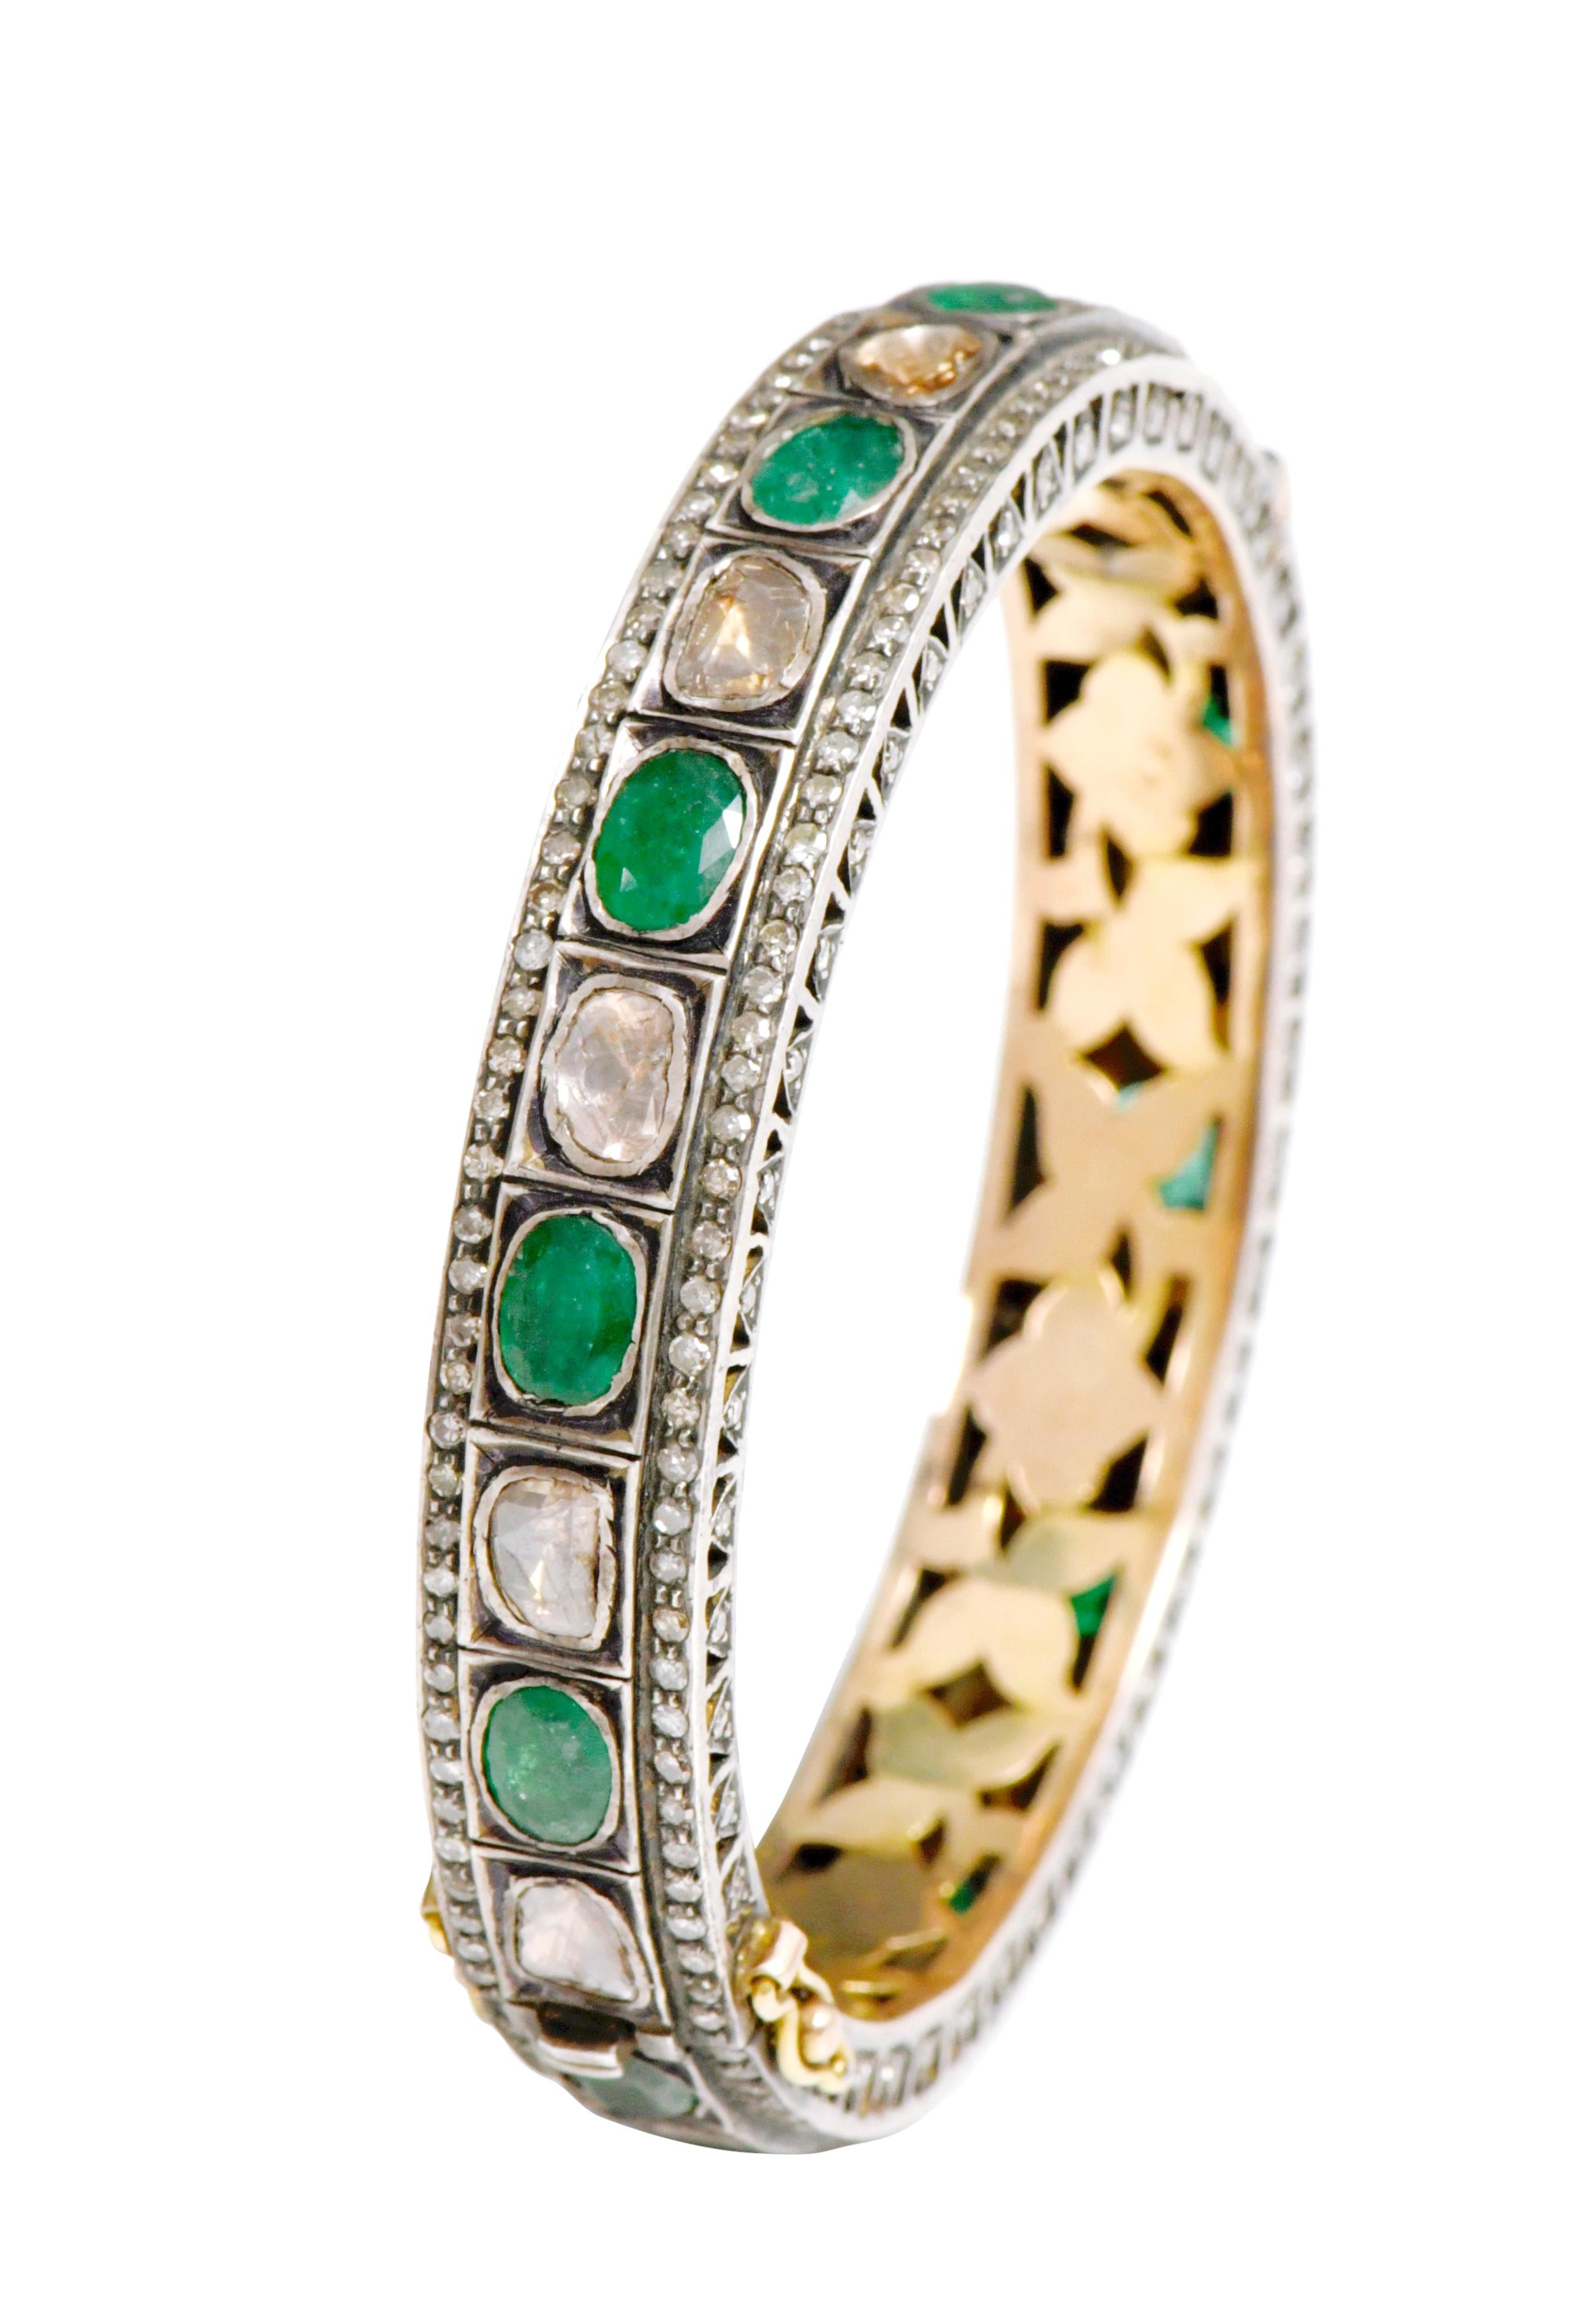 Diamond and Natural Emerald Tennis Bangle in Art-Deco Style 

This Victorian period art-deco atypical polki diamond and forest green emerald bangle is incredible. The uneven triangle and U-cut flat polki diamond solitaires alternated with oval shape